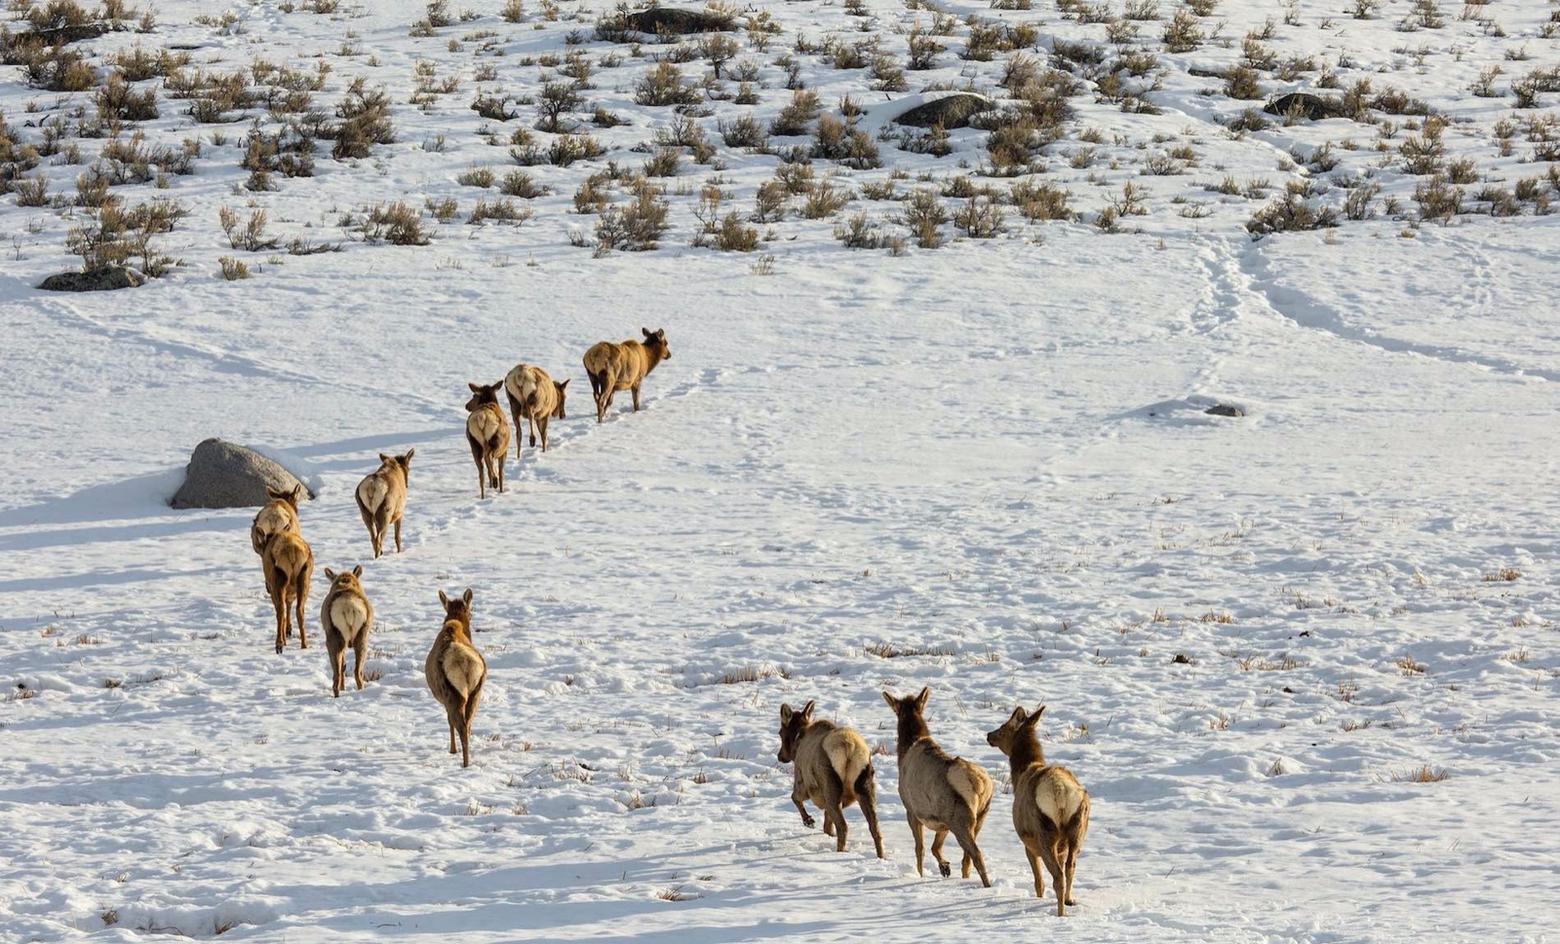 Wildlife research shows that at least nine major elk herds converge upon Yellowstone National Park in spring and then leave the high country when heavy snows arrive. Most of those herds utilize Wilderness areas on adjacent national forests as safe passageways that are free from human development and a lot of human disturbance. Thousands of elk, including members of the famous Gallatin Herd move through the Porcupine and Buffalo Horn to the Madison Valley and western Gallatin Valley. Many elk live in the Porcupine and Buffalo Horn year-round; the drainages serve as important calving grounds for cow elk that seek out secure habitat. Elk no longer move through Big Sky in the great numbers they used to.  Photo courtesy Neal Herbert/NPS